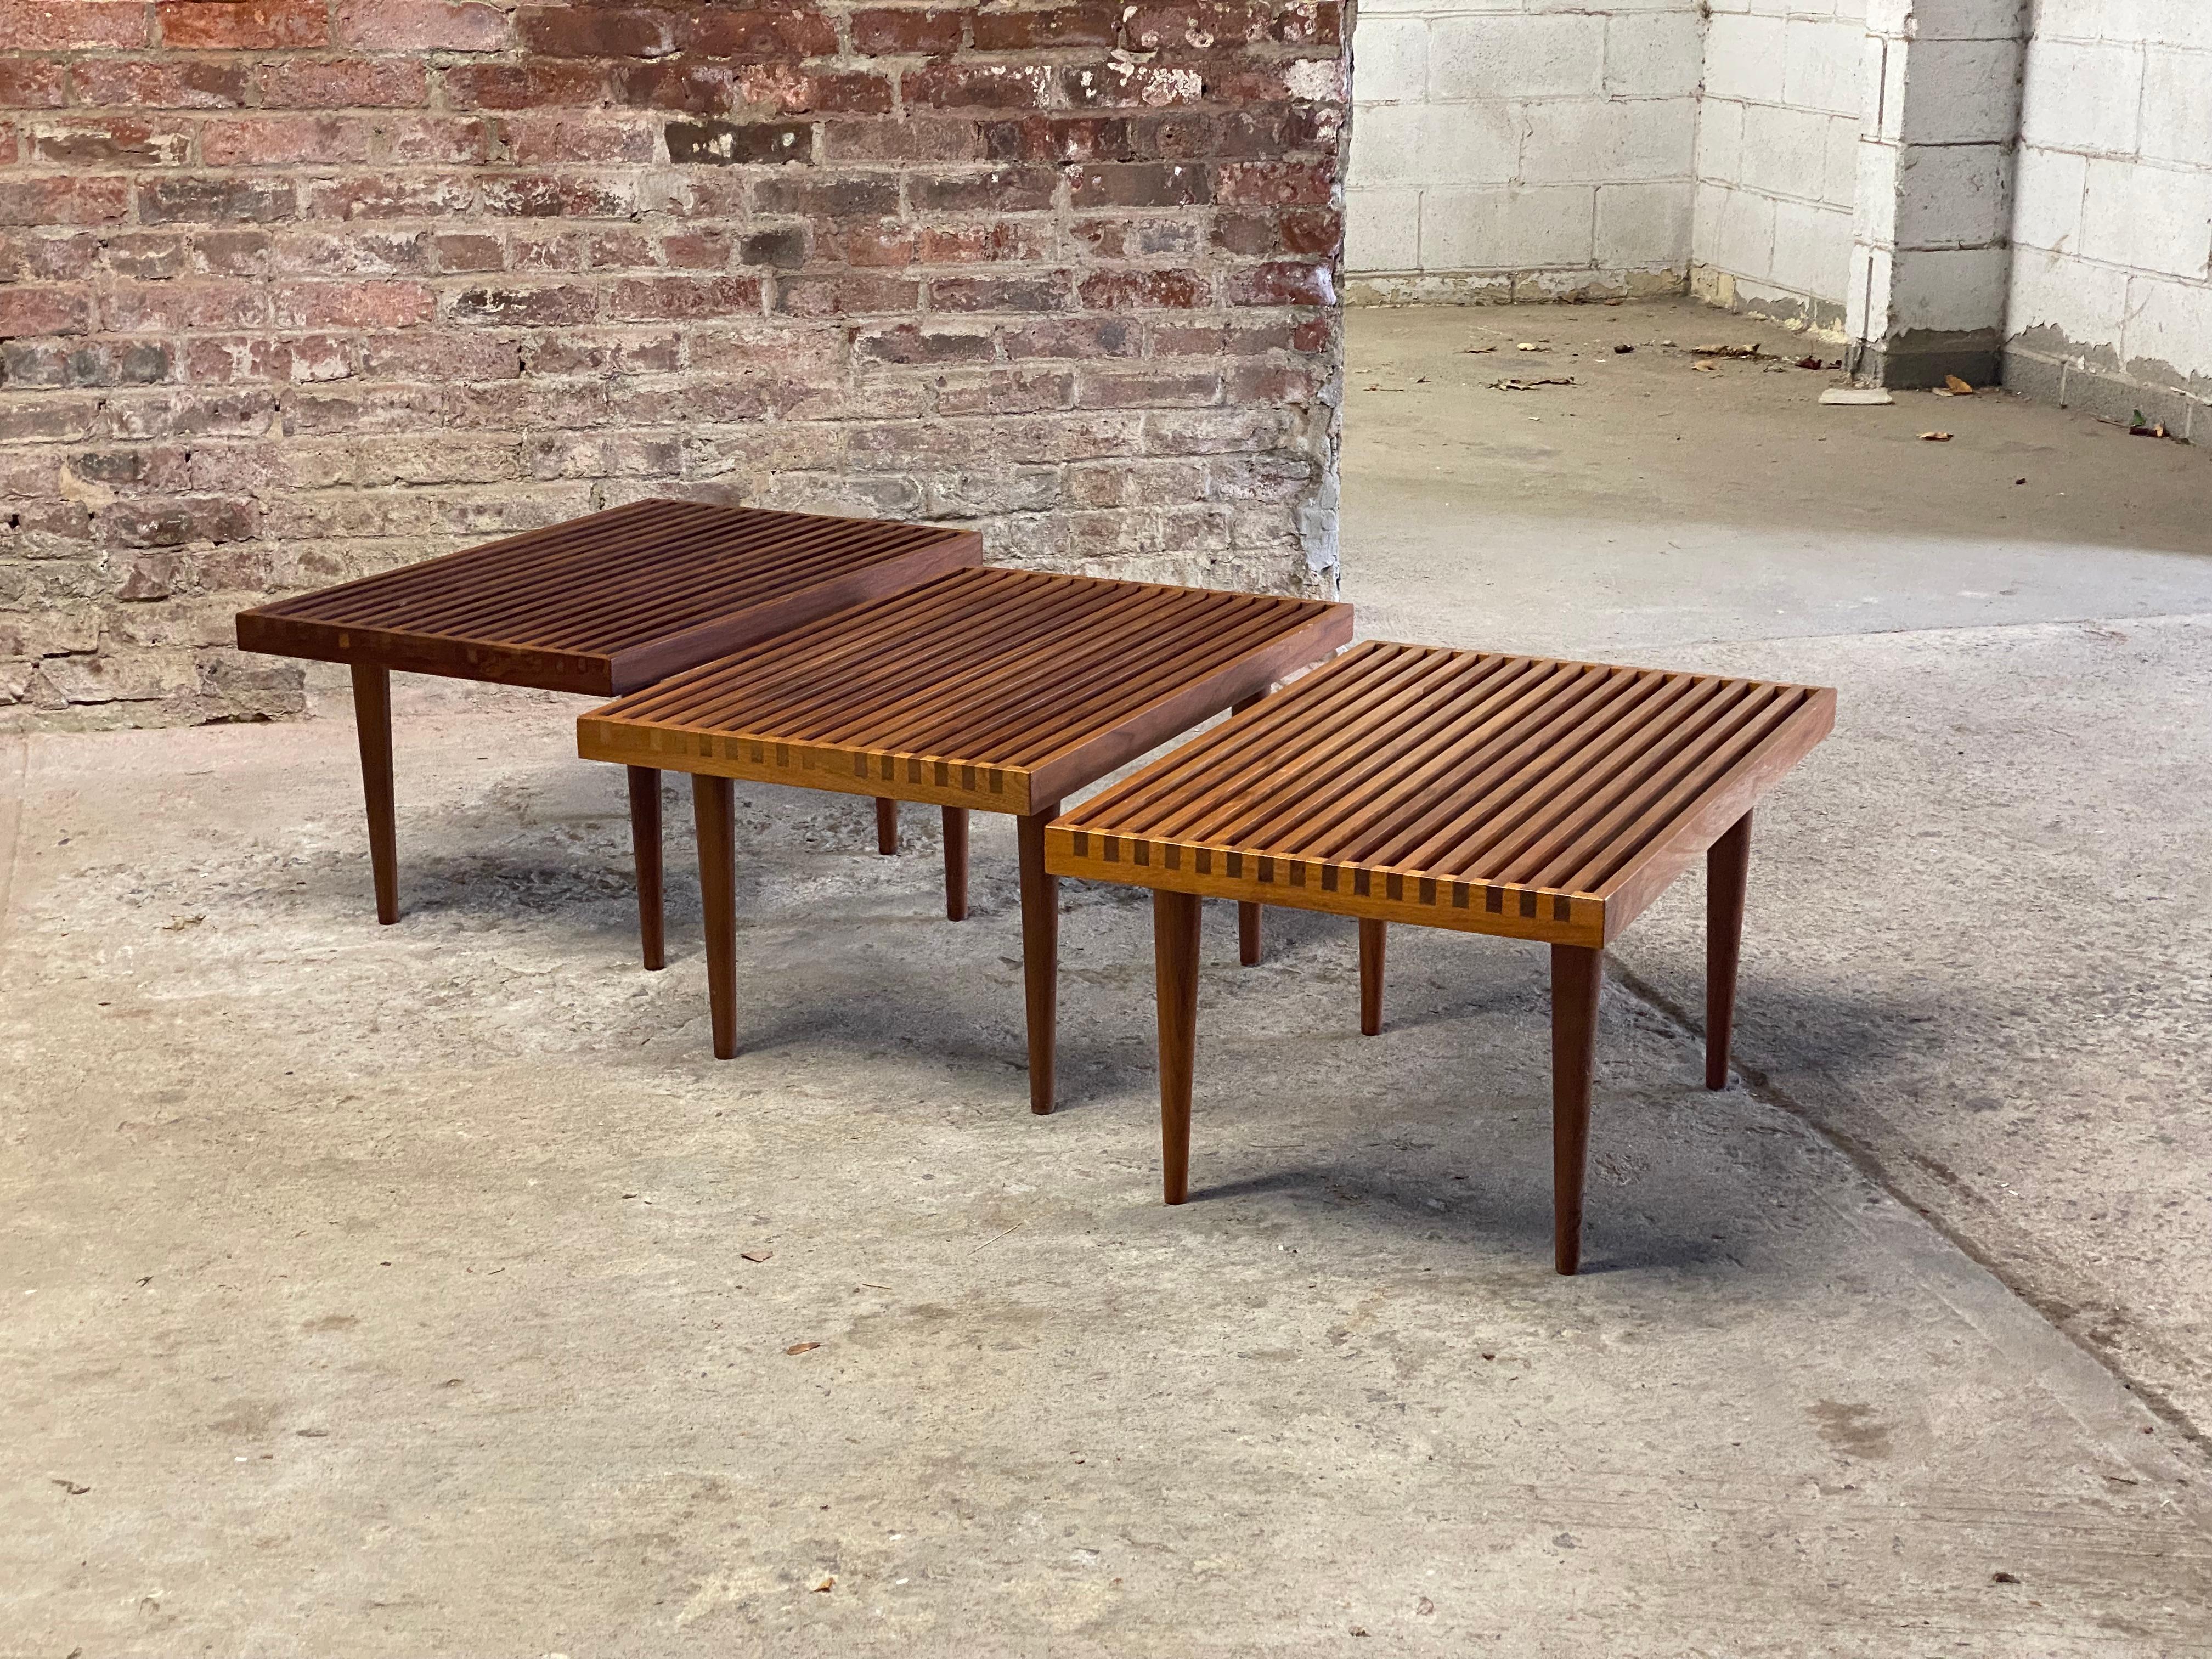 A fine set of three Mel Smilow (1922-2002) designed solid walnut slat tables. Wonderful oiled walnut featuring that signature splined corners, cross cut color contrast sides and removable tapered legs. Flat pack design. These are great accent tables